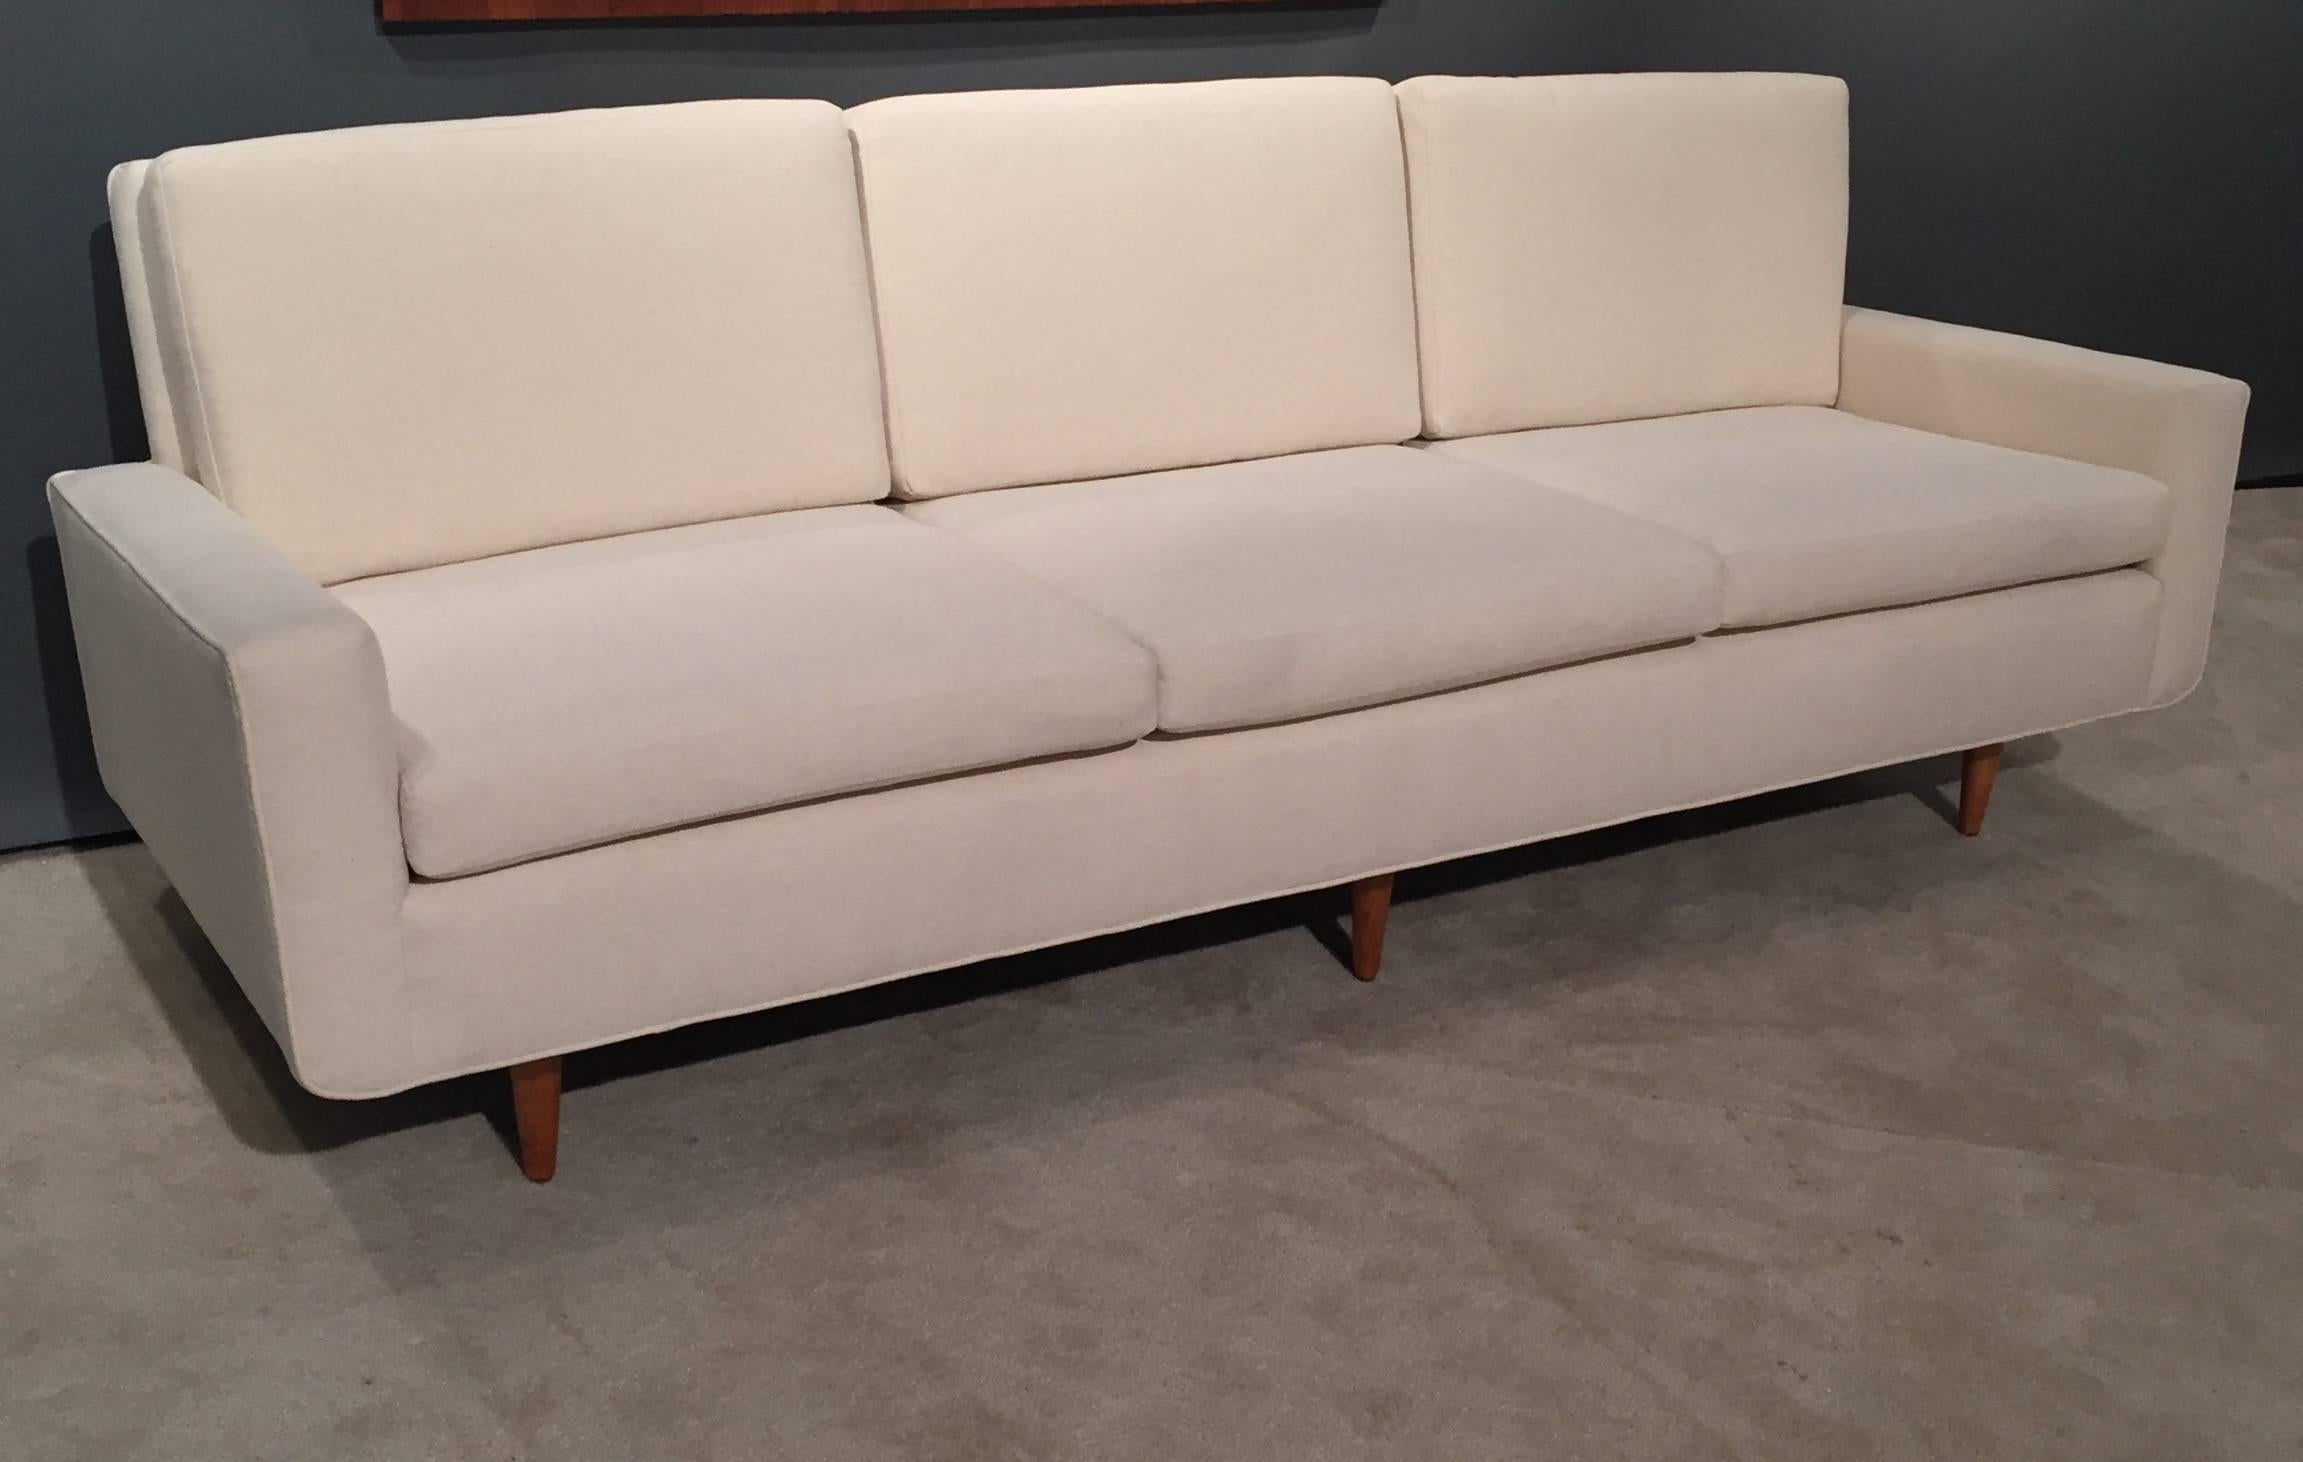 Florence Knoll sofa, all interior rebuilt, new foam, in weaved off-white fabric.

Matching club chairs, separate listing.